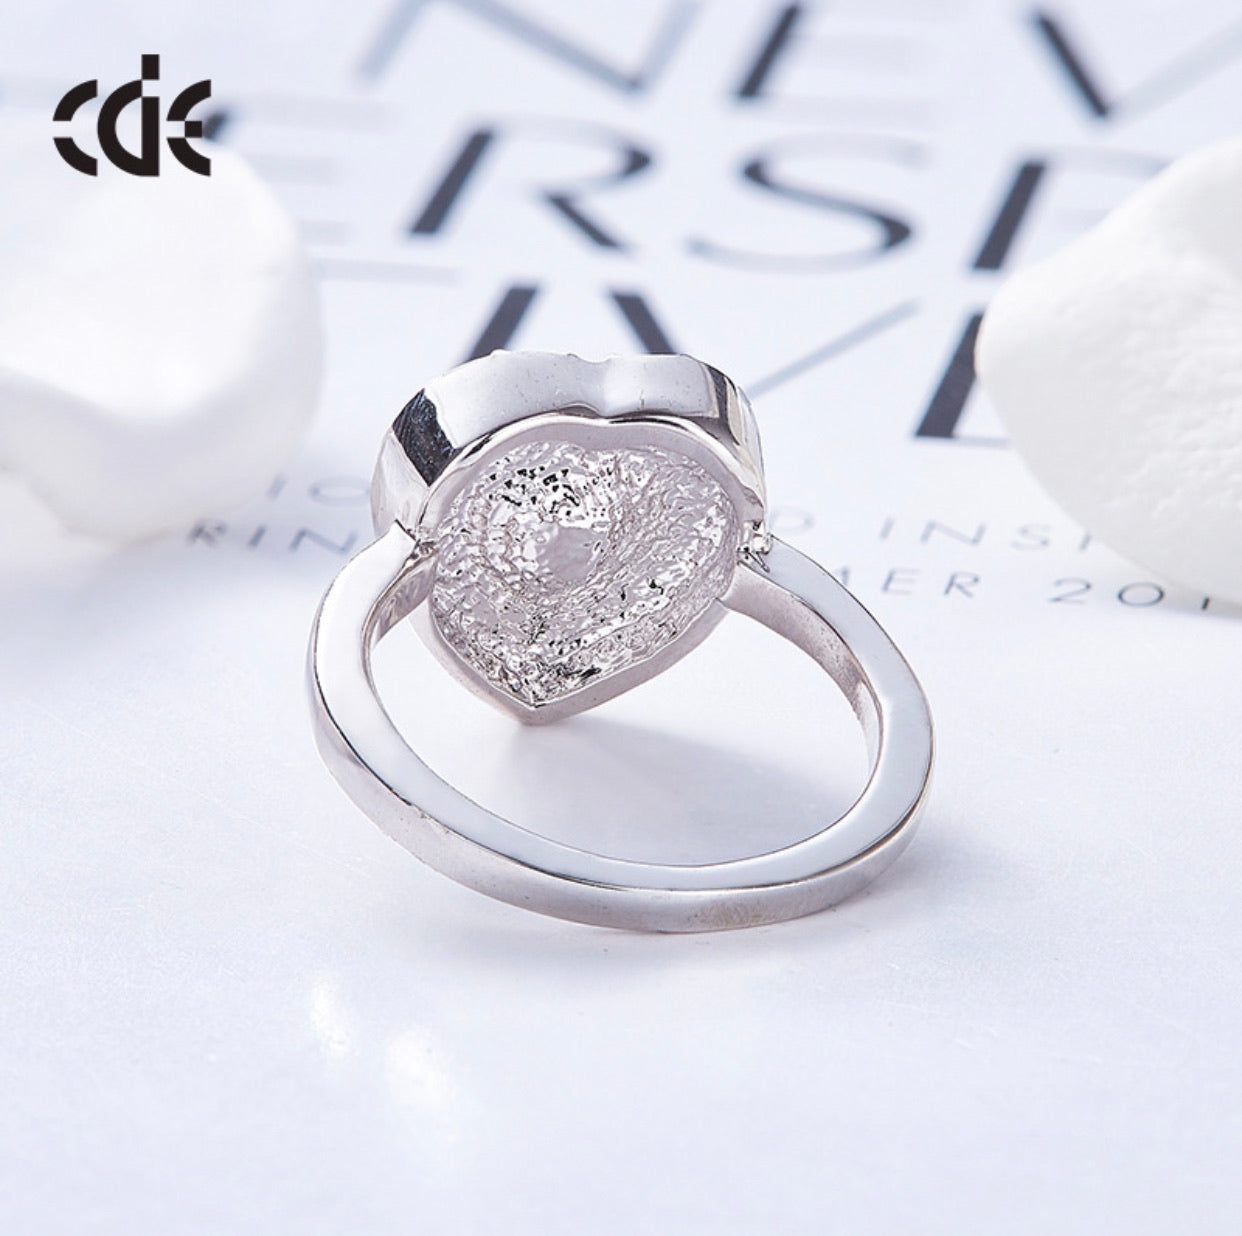 The shining heart shaped ring - CDE Jewelry Egypt